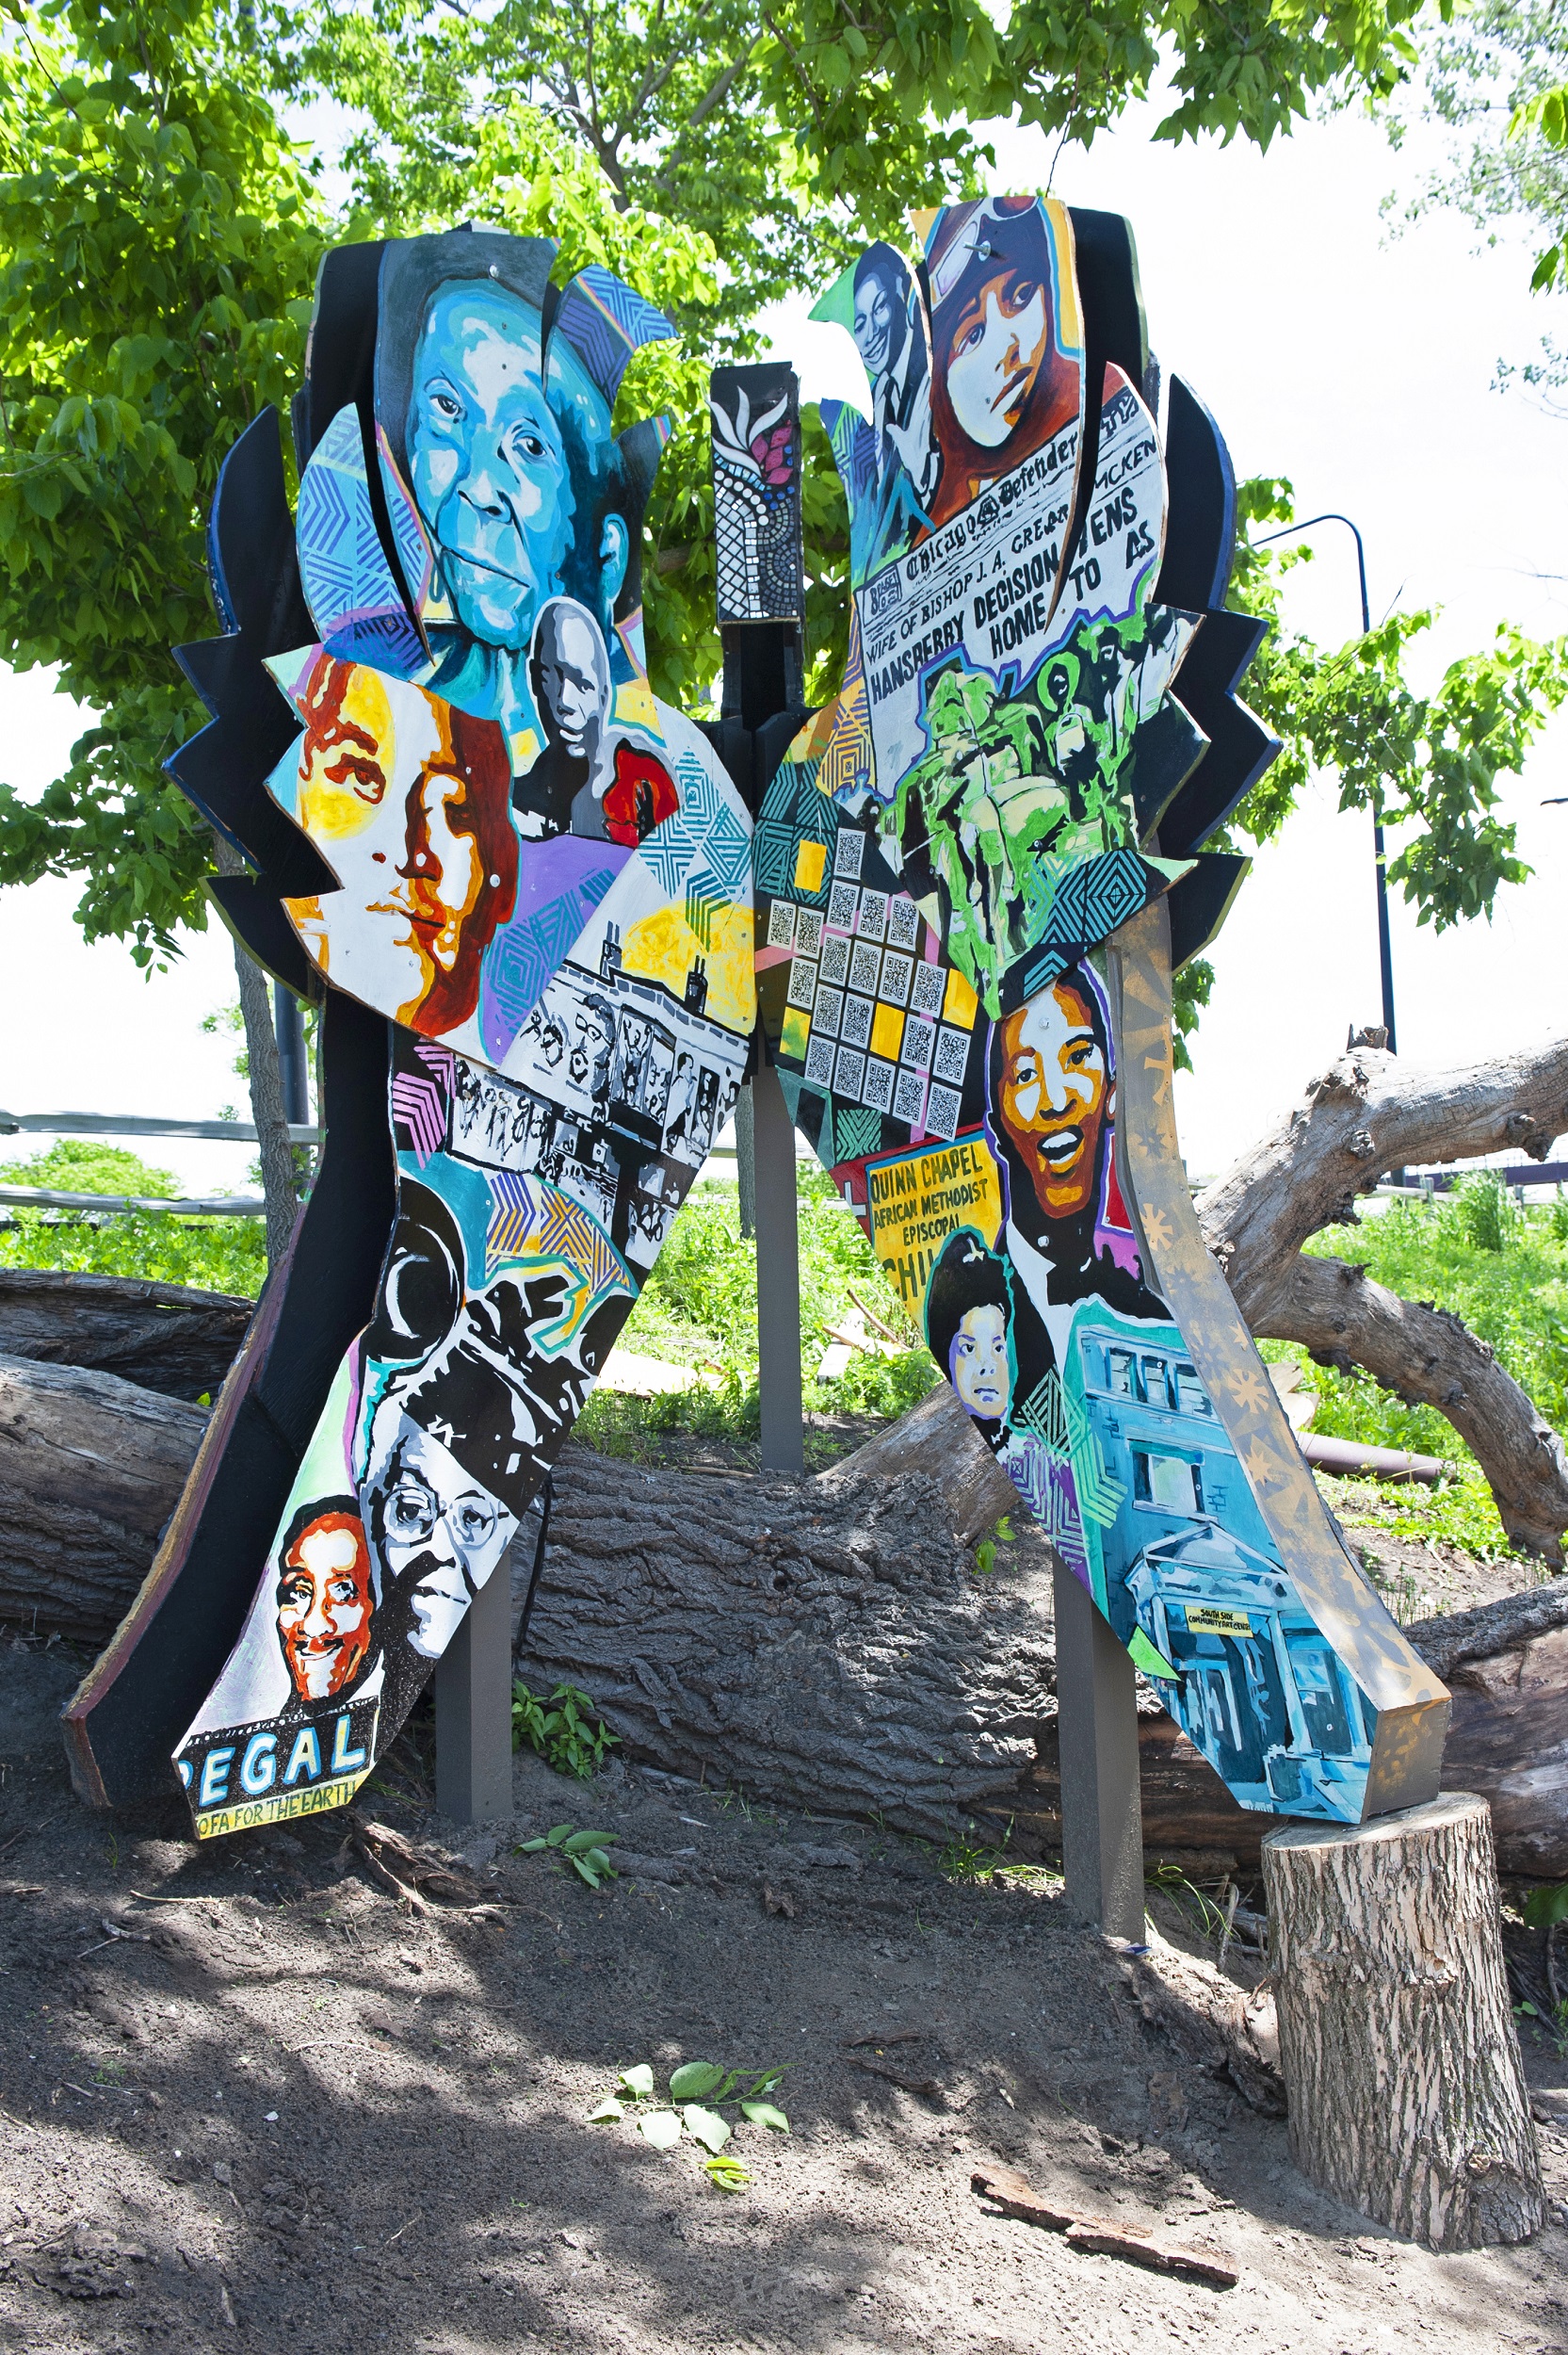 Colorful outdoor sculpture in the shape of wings decorated with various faces